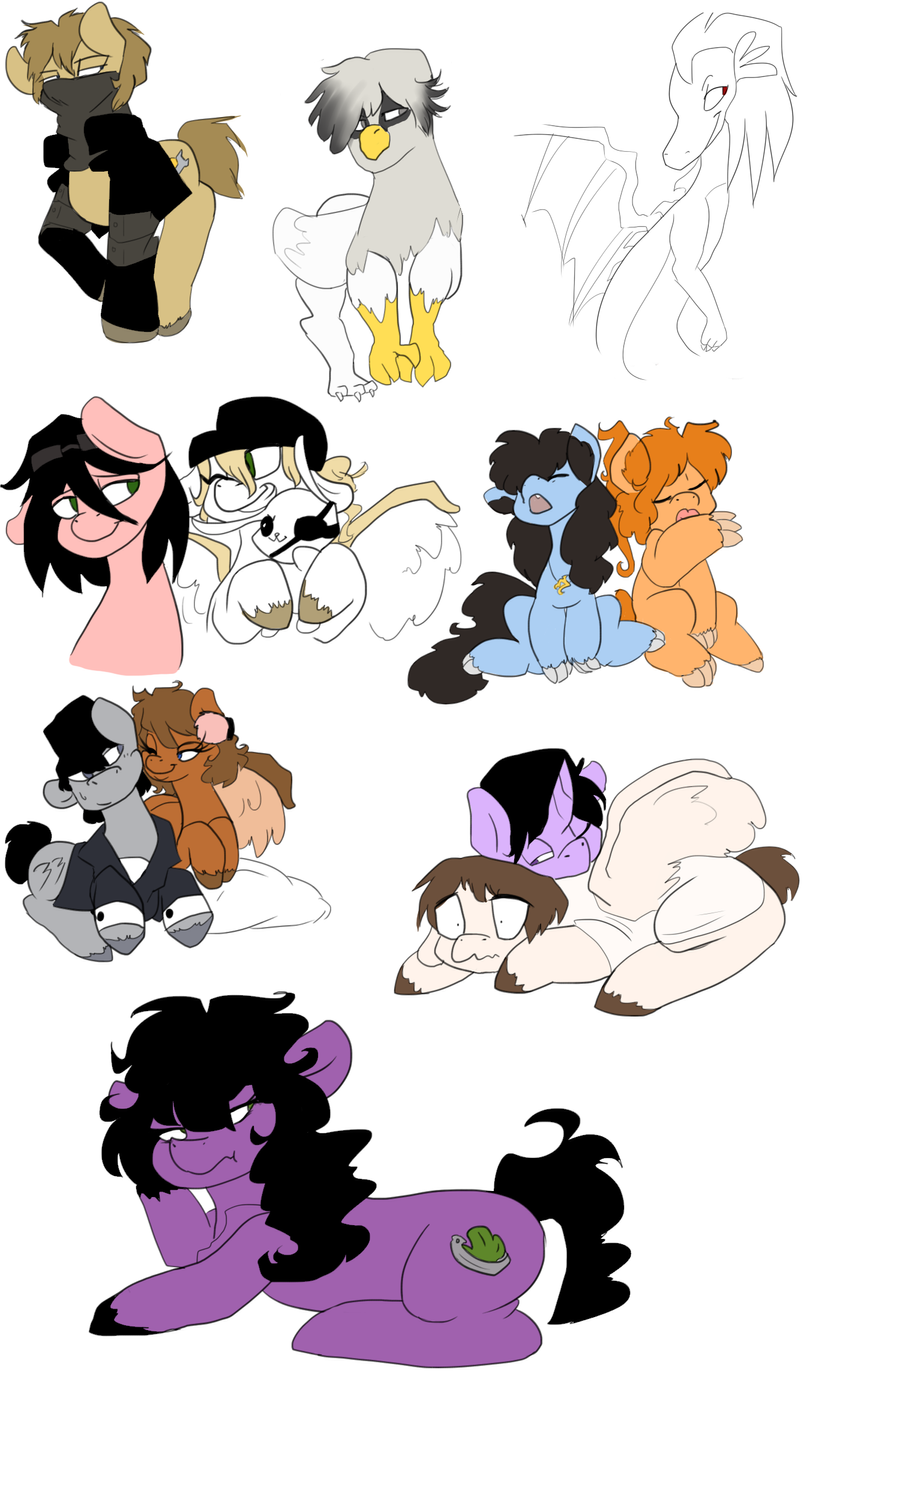 ponies_by_freepotshots-d5hsyzt.png